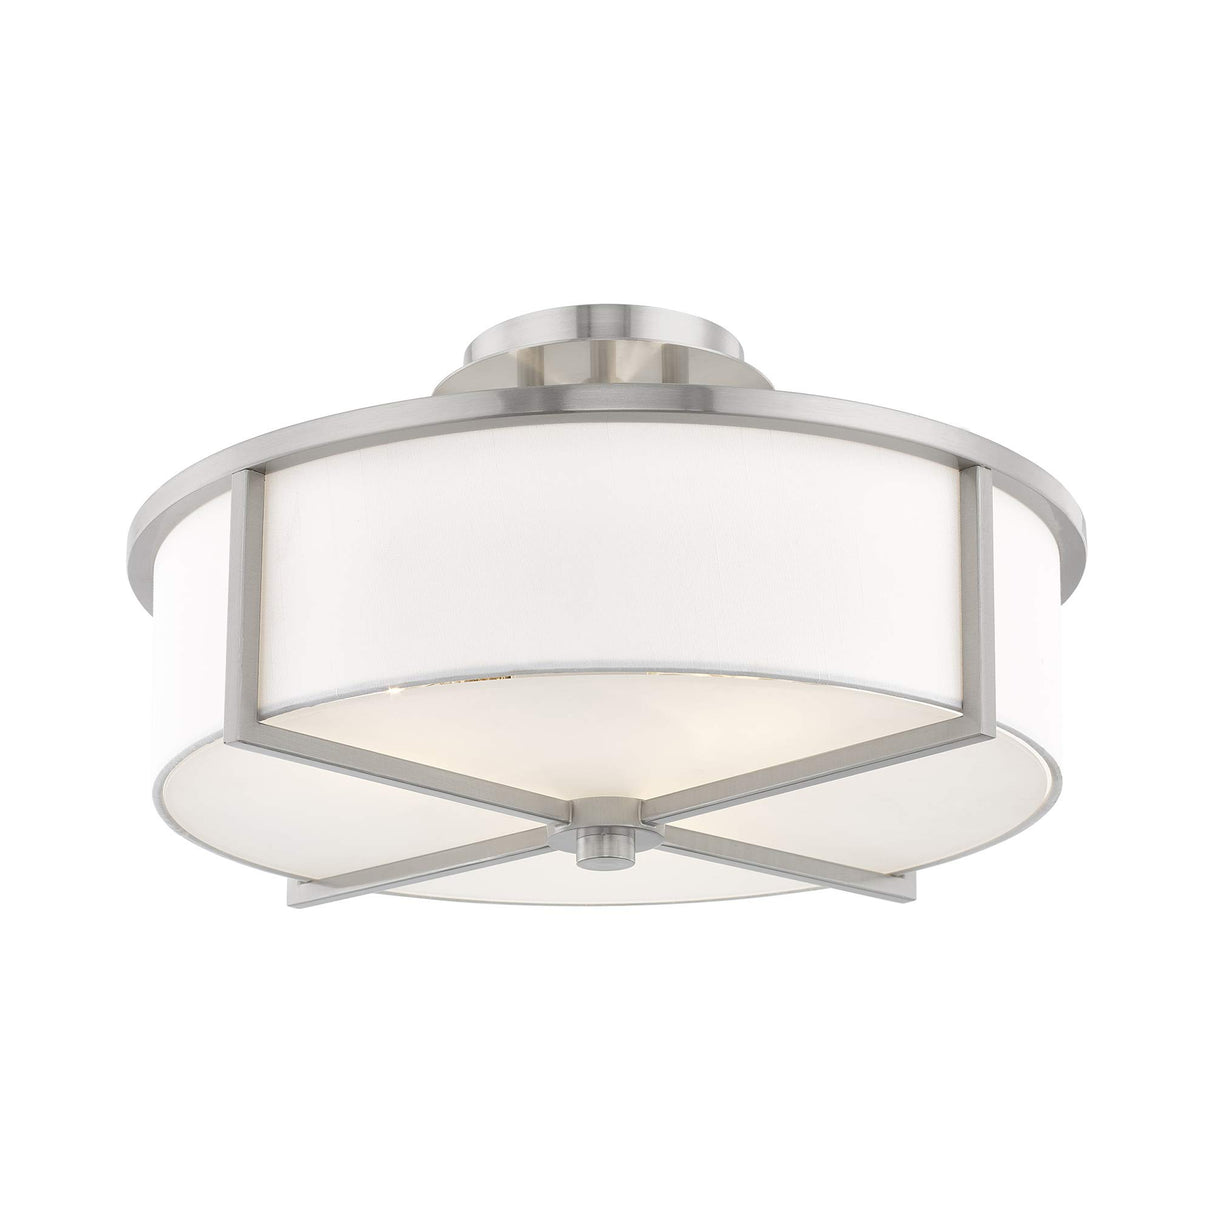 Livex Lighting 51074-91 Transitional Three Light Ceiling Mount from Wesley Collection in Pwt, Nckl, B/S, Slvr. Finish, Brushed Nickel